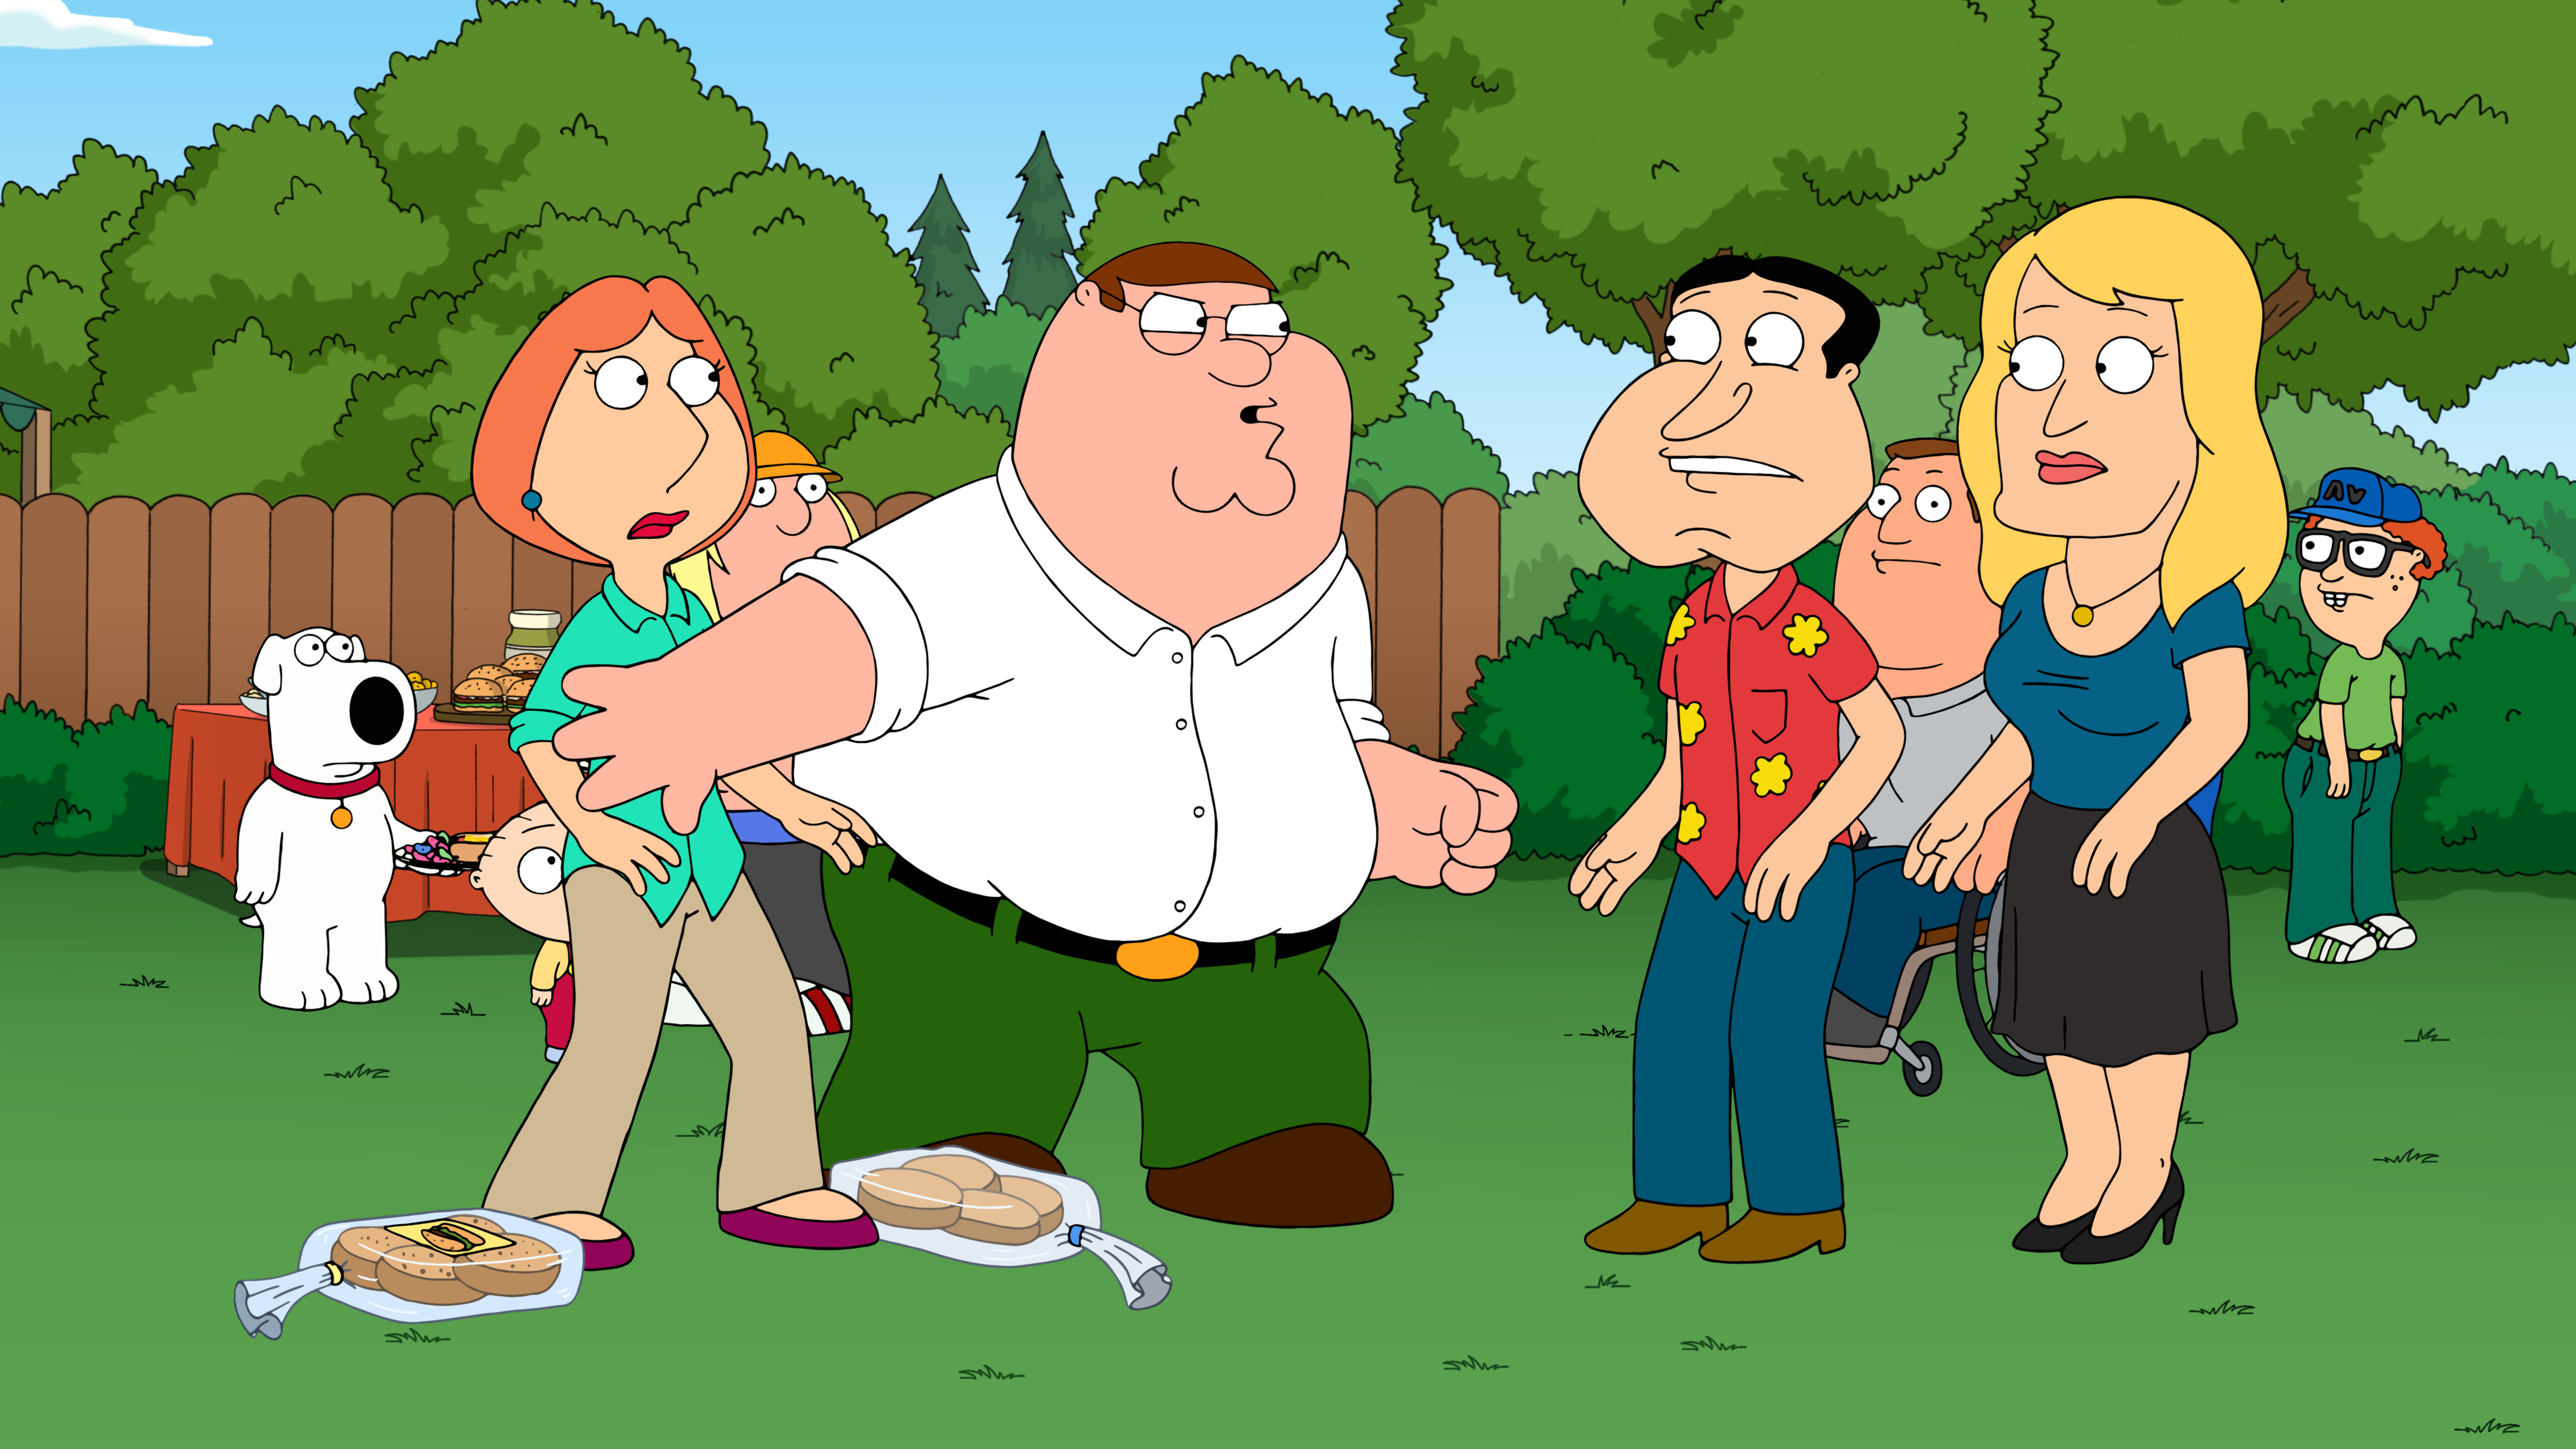 charlie bolante recommends lois and quagmire doing it pic